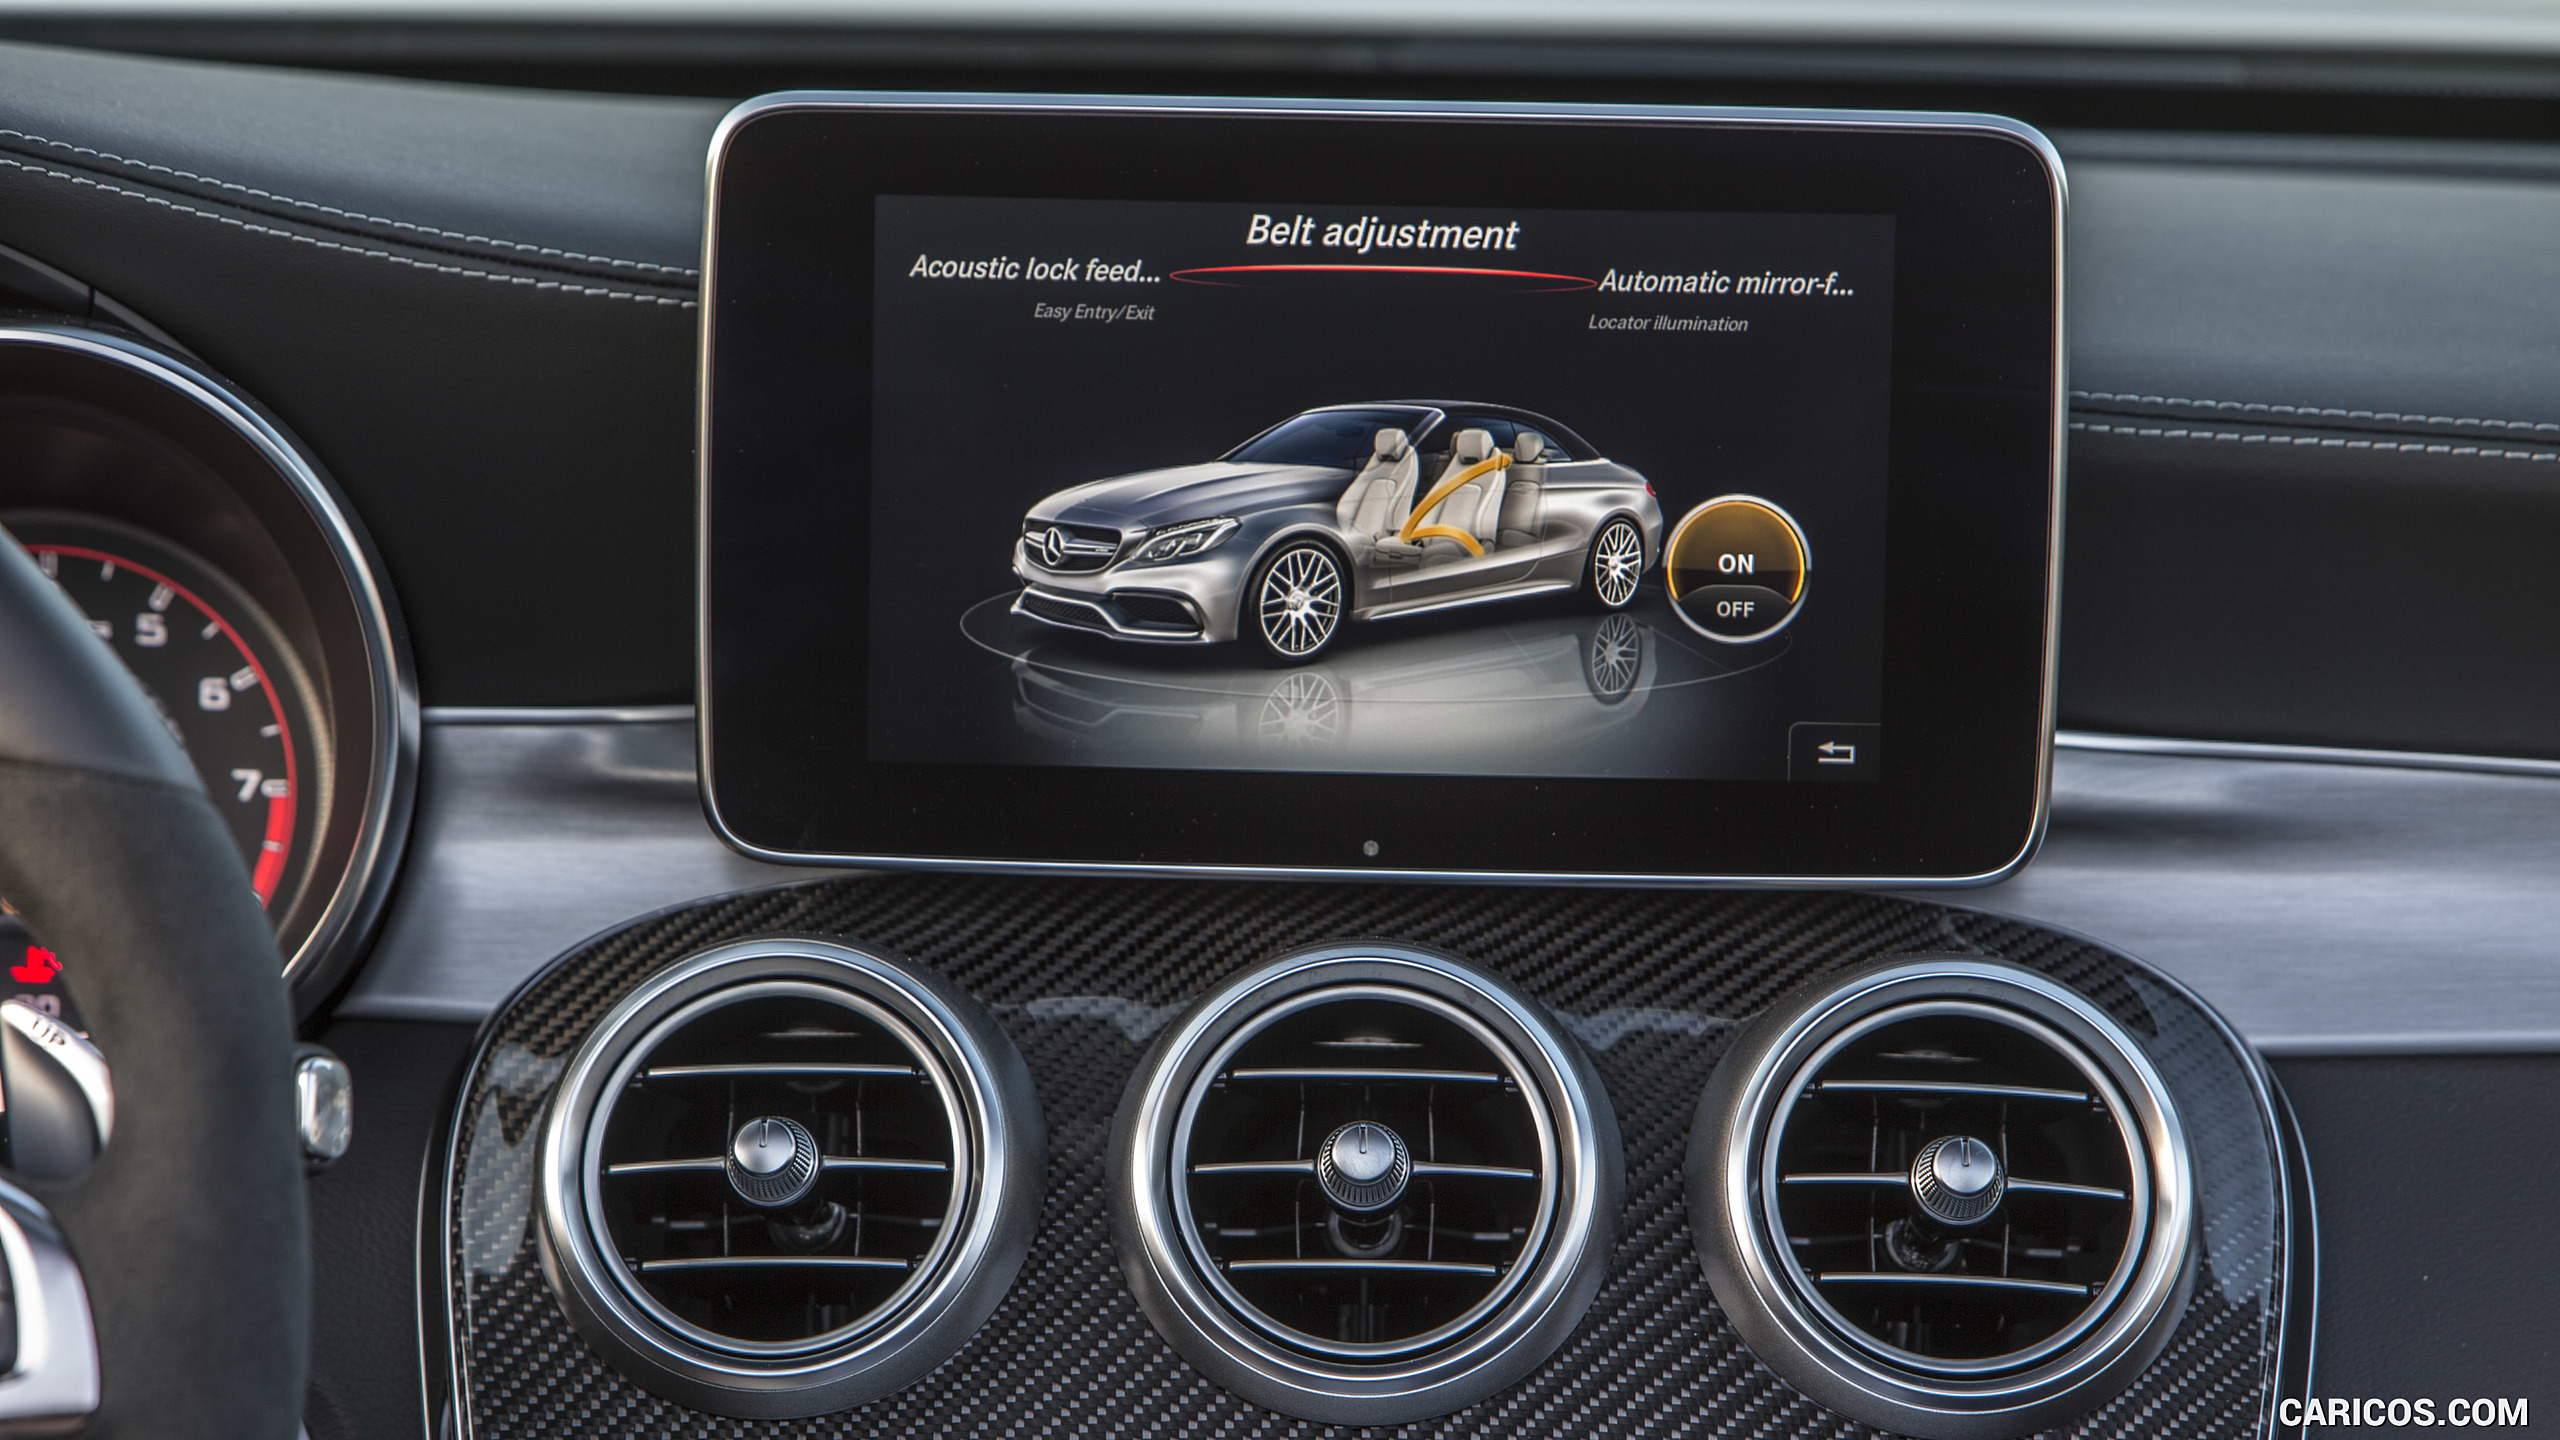 2017 Mercedes-AMG C63 S Cabriolet - Infotainment Screen - Central Console, #162 of 222